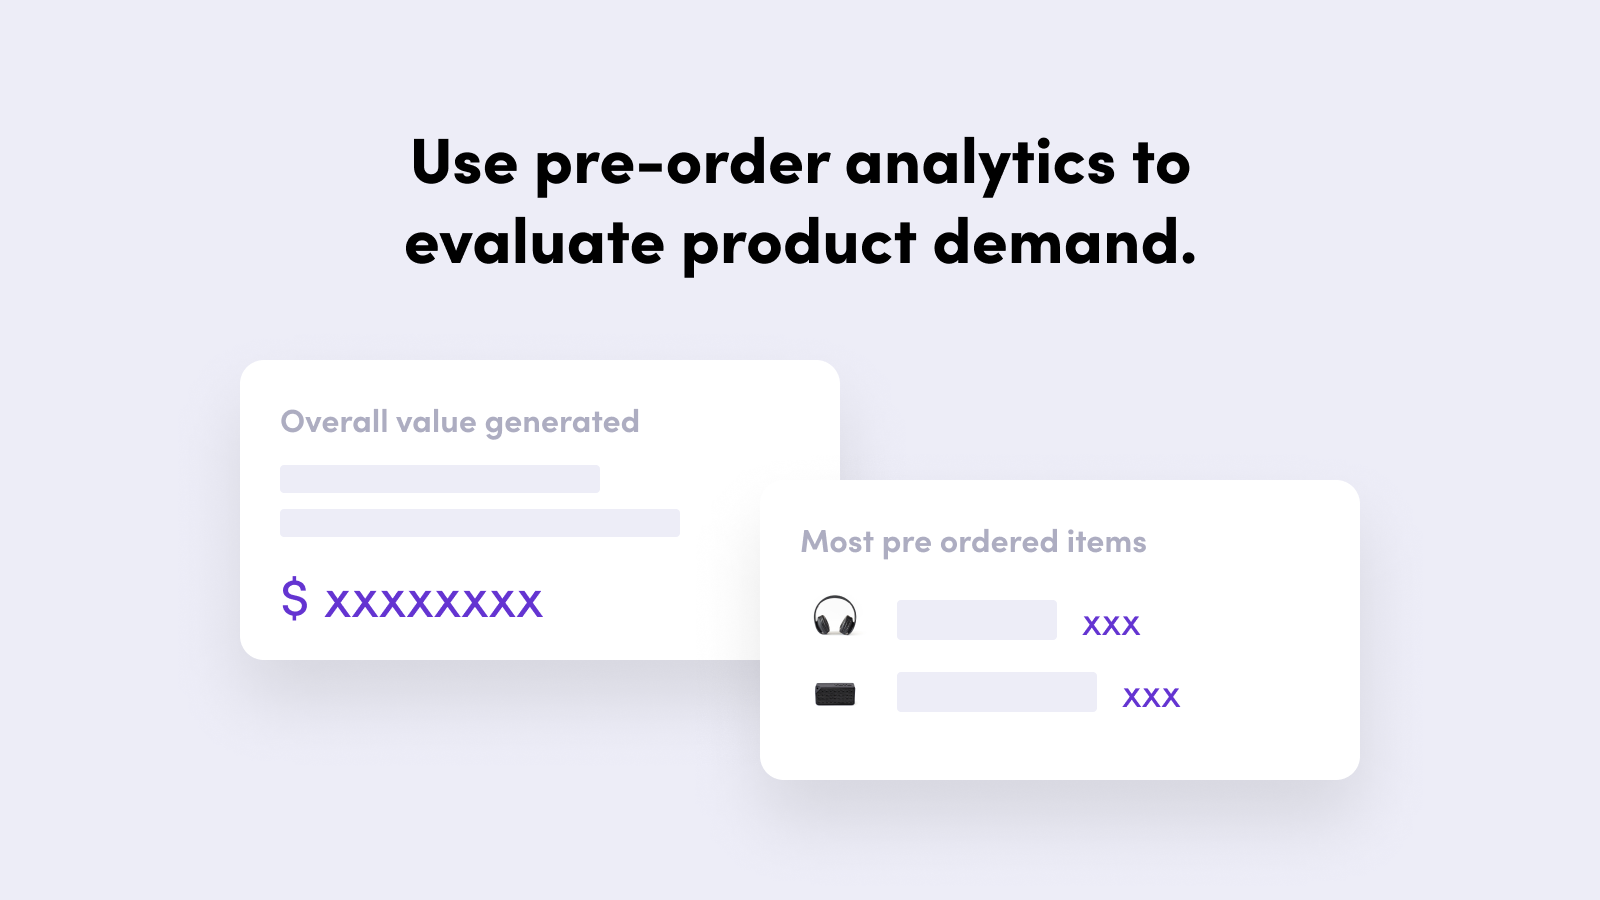 Use pre-order analytics to evaluate product demand.